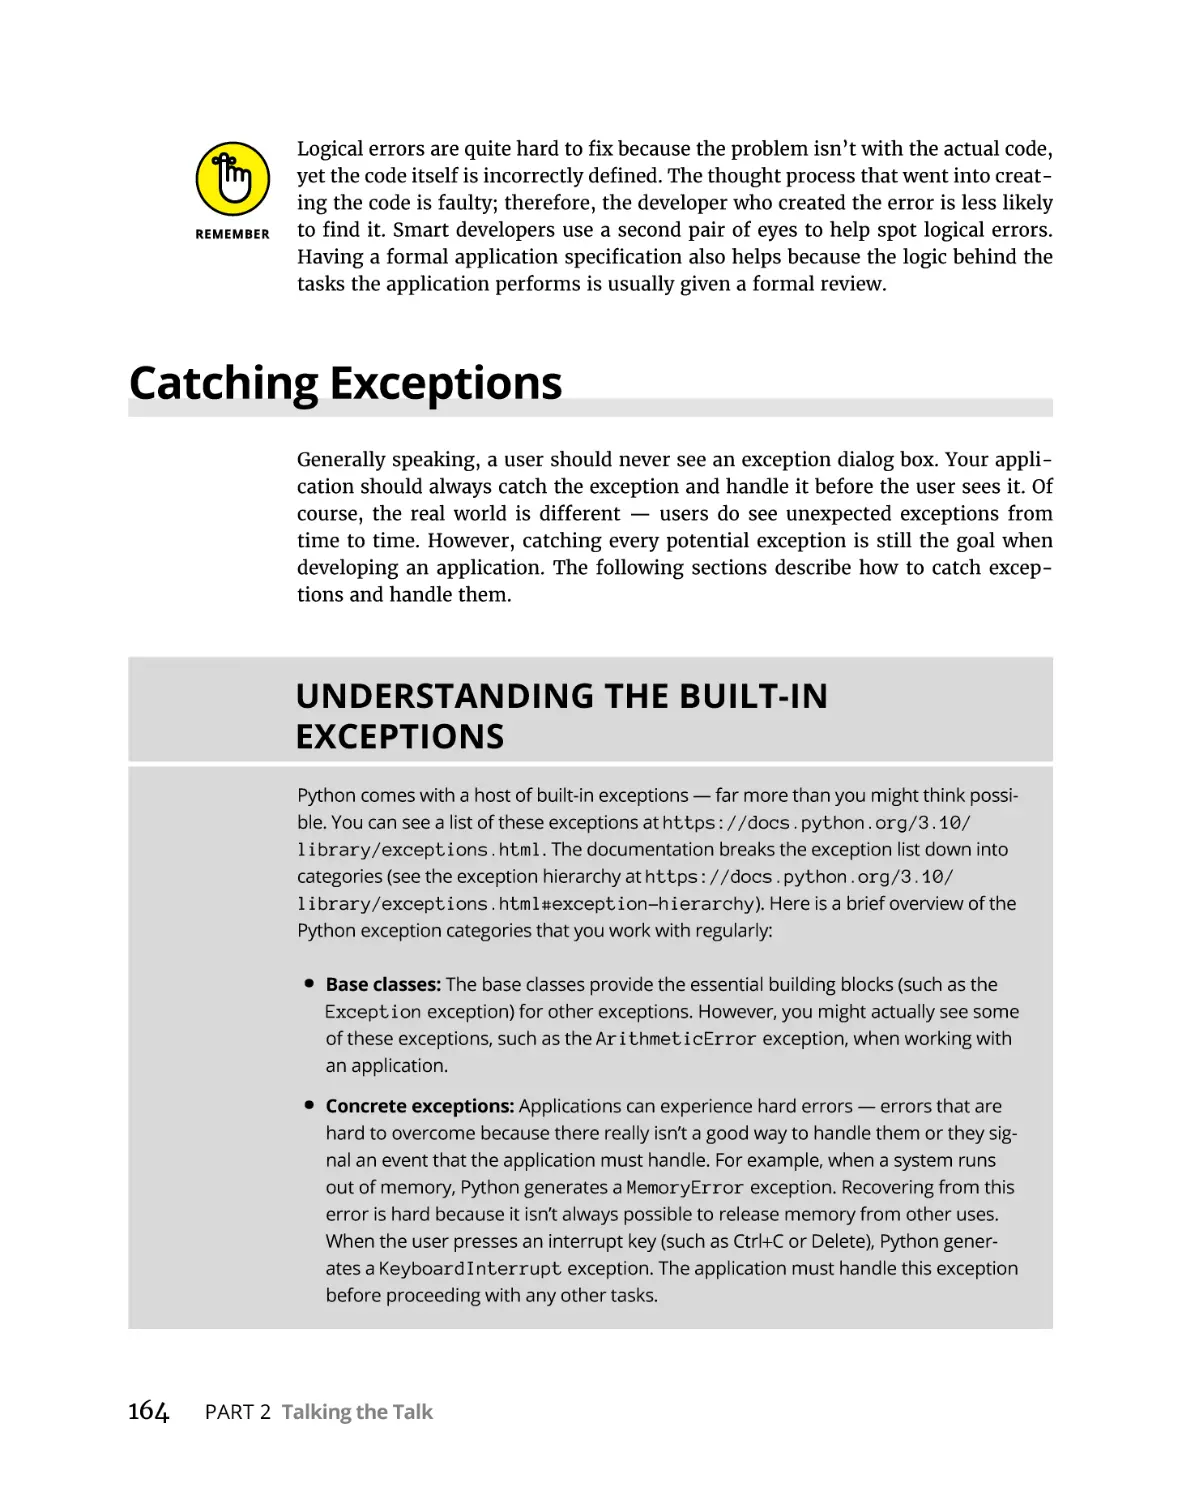 Catching Exceptions